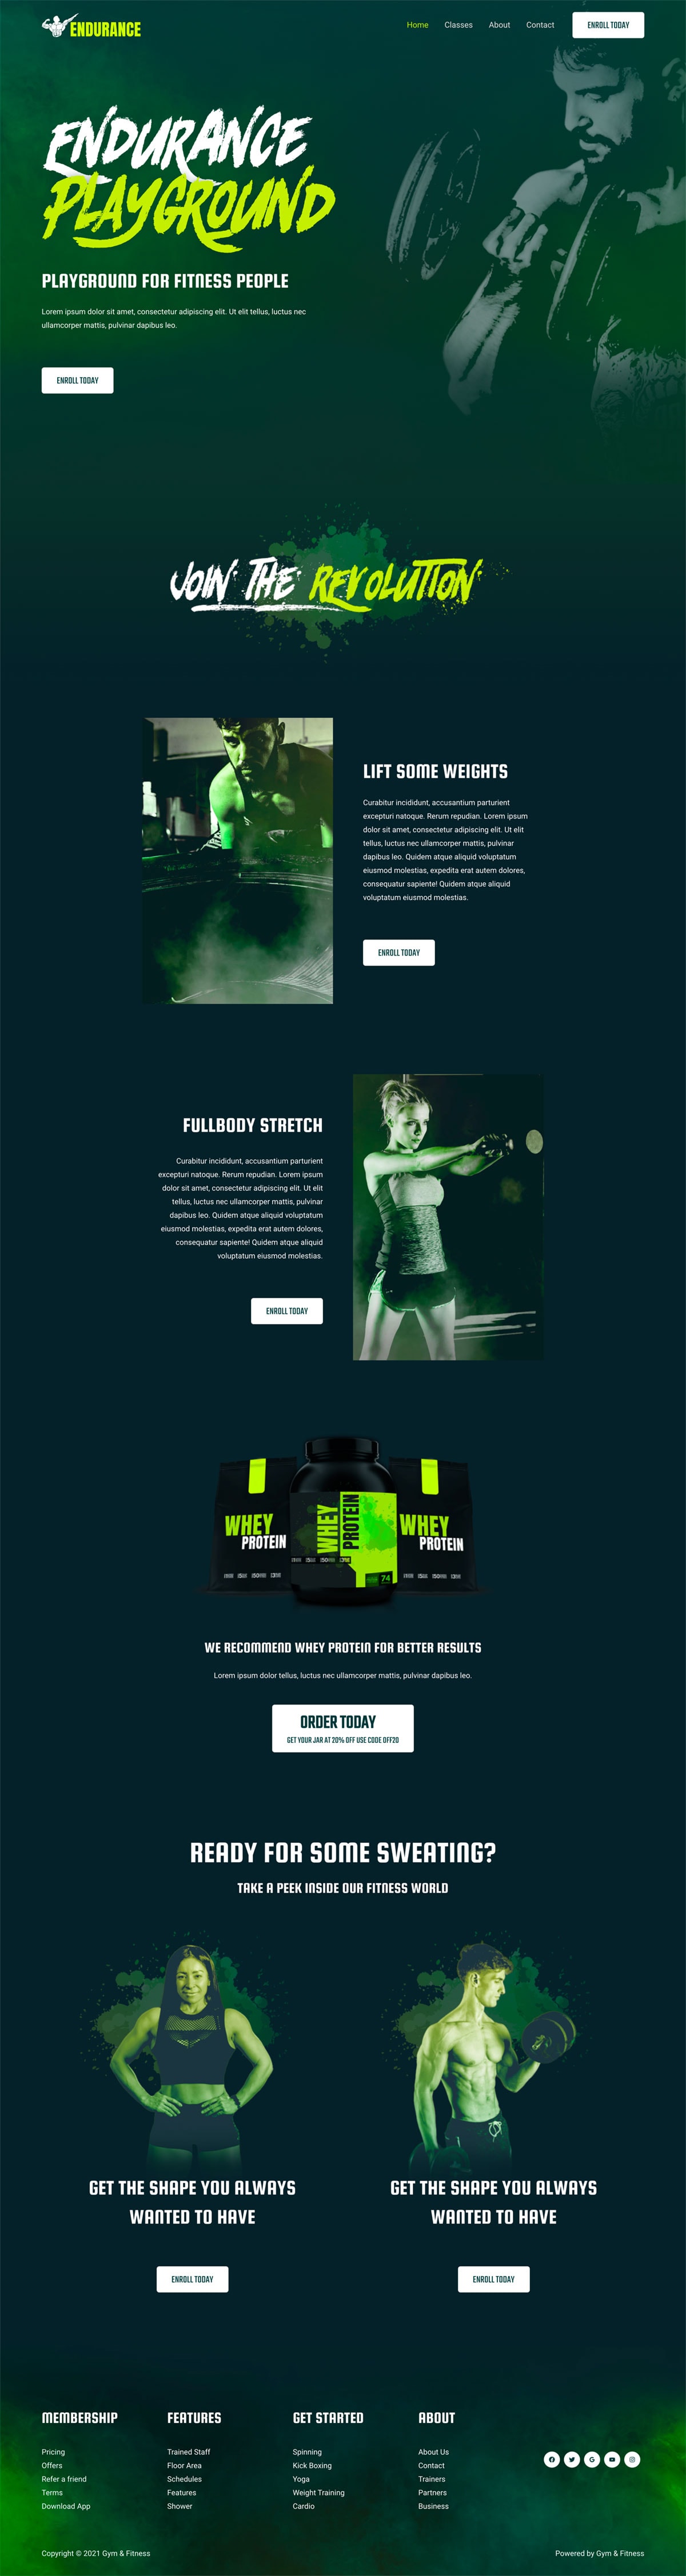 10+ FREE Gym / Fitness Website Templates and Designs